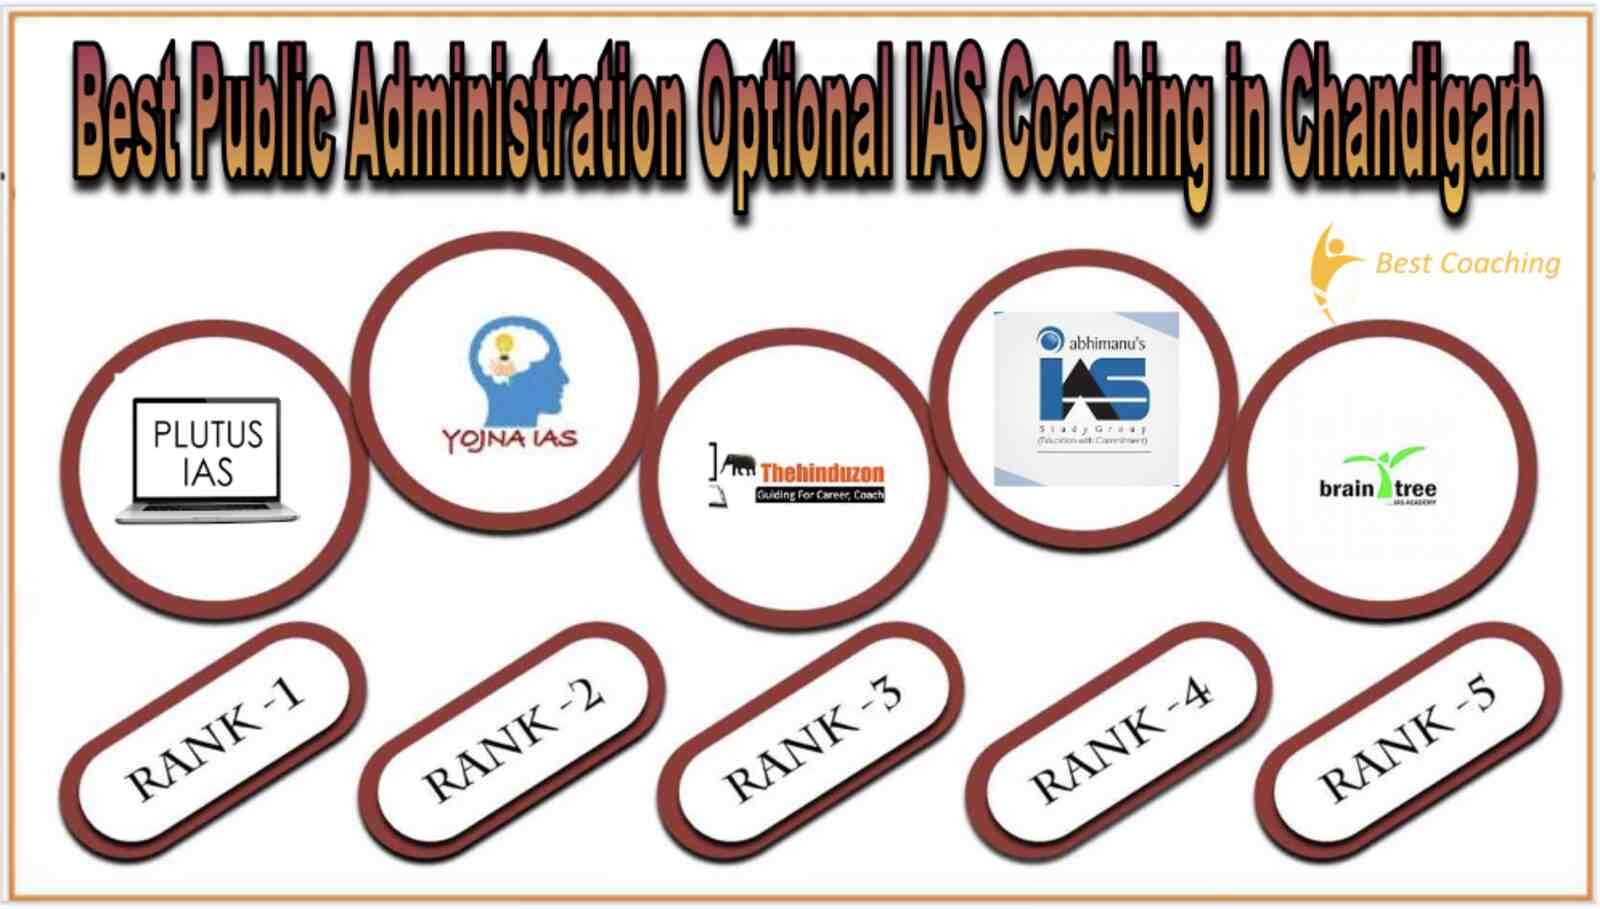 Best Public Administration Optional IAS Coaching in Chandigarh